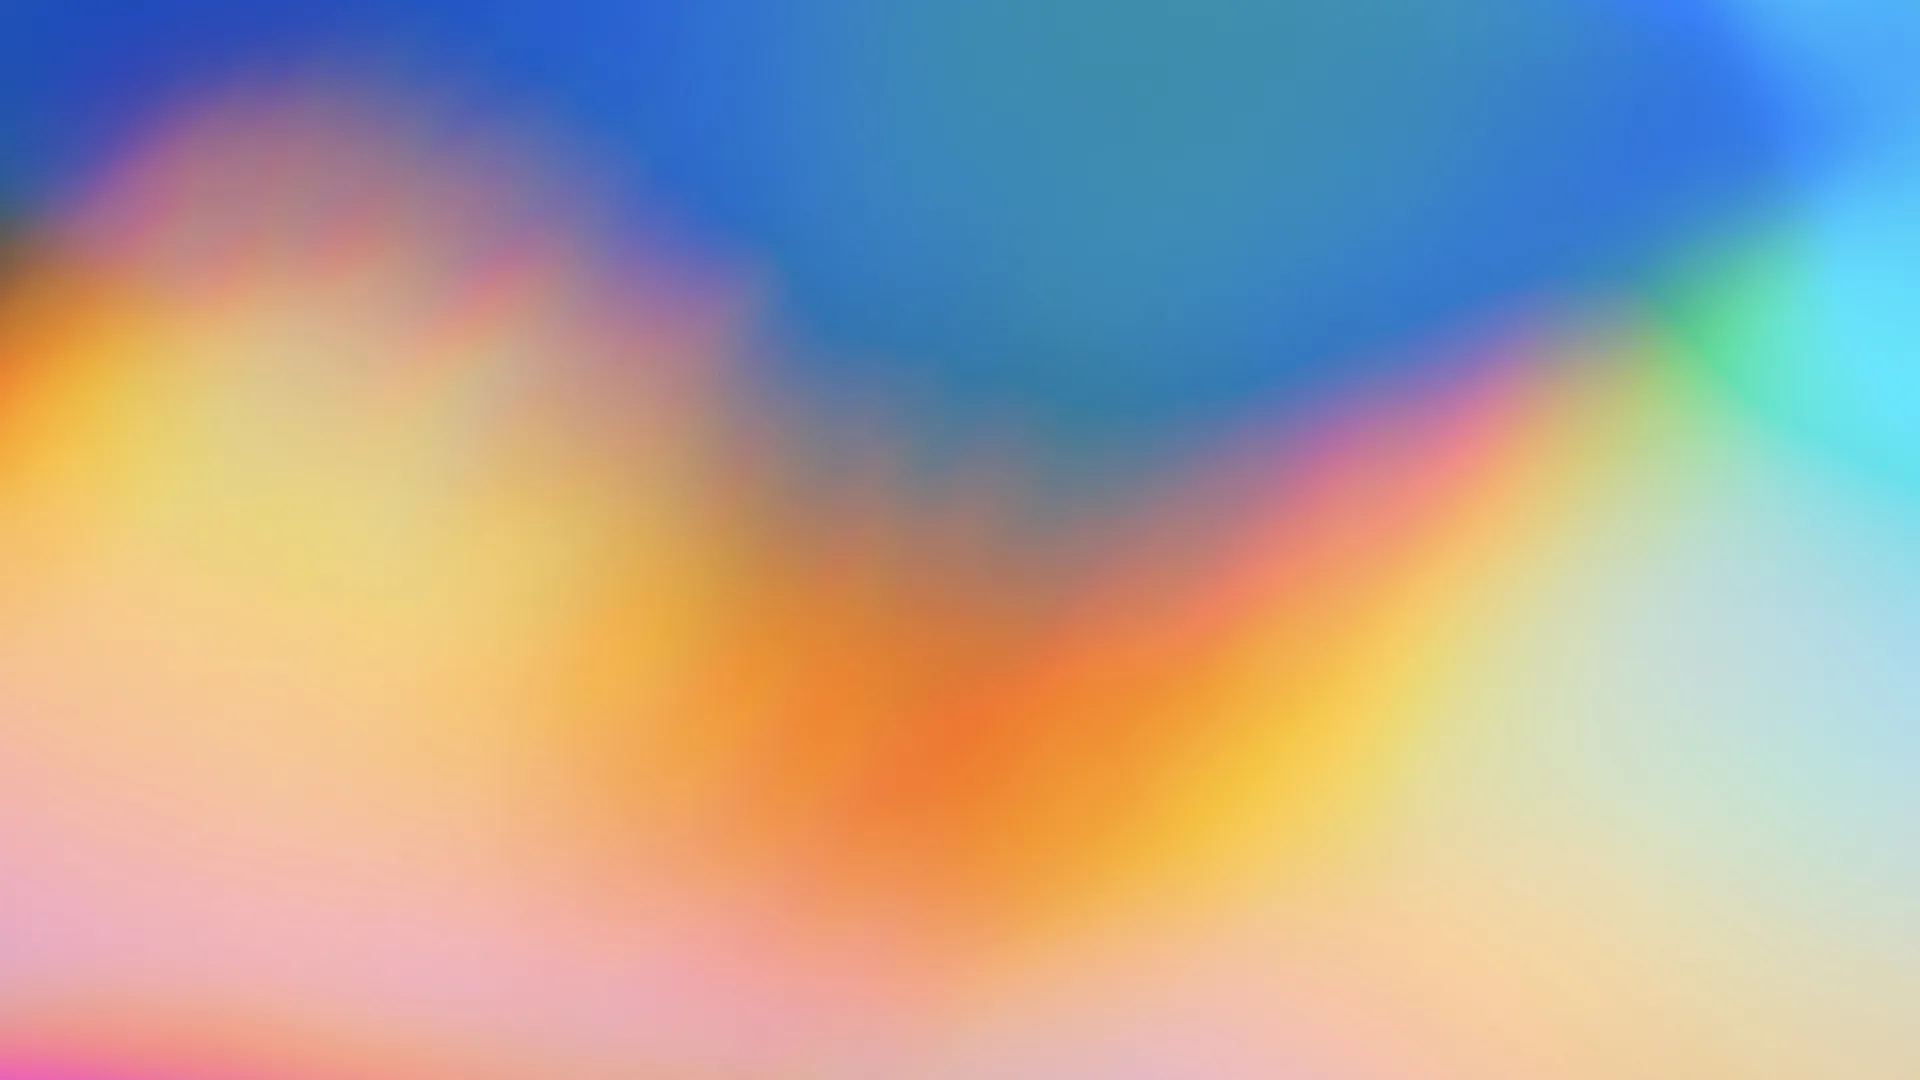 A blurry image of a multi-coloured pattern